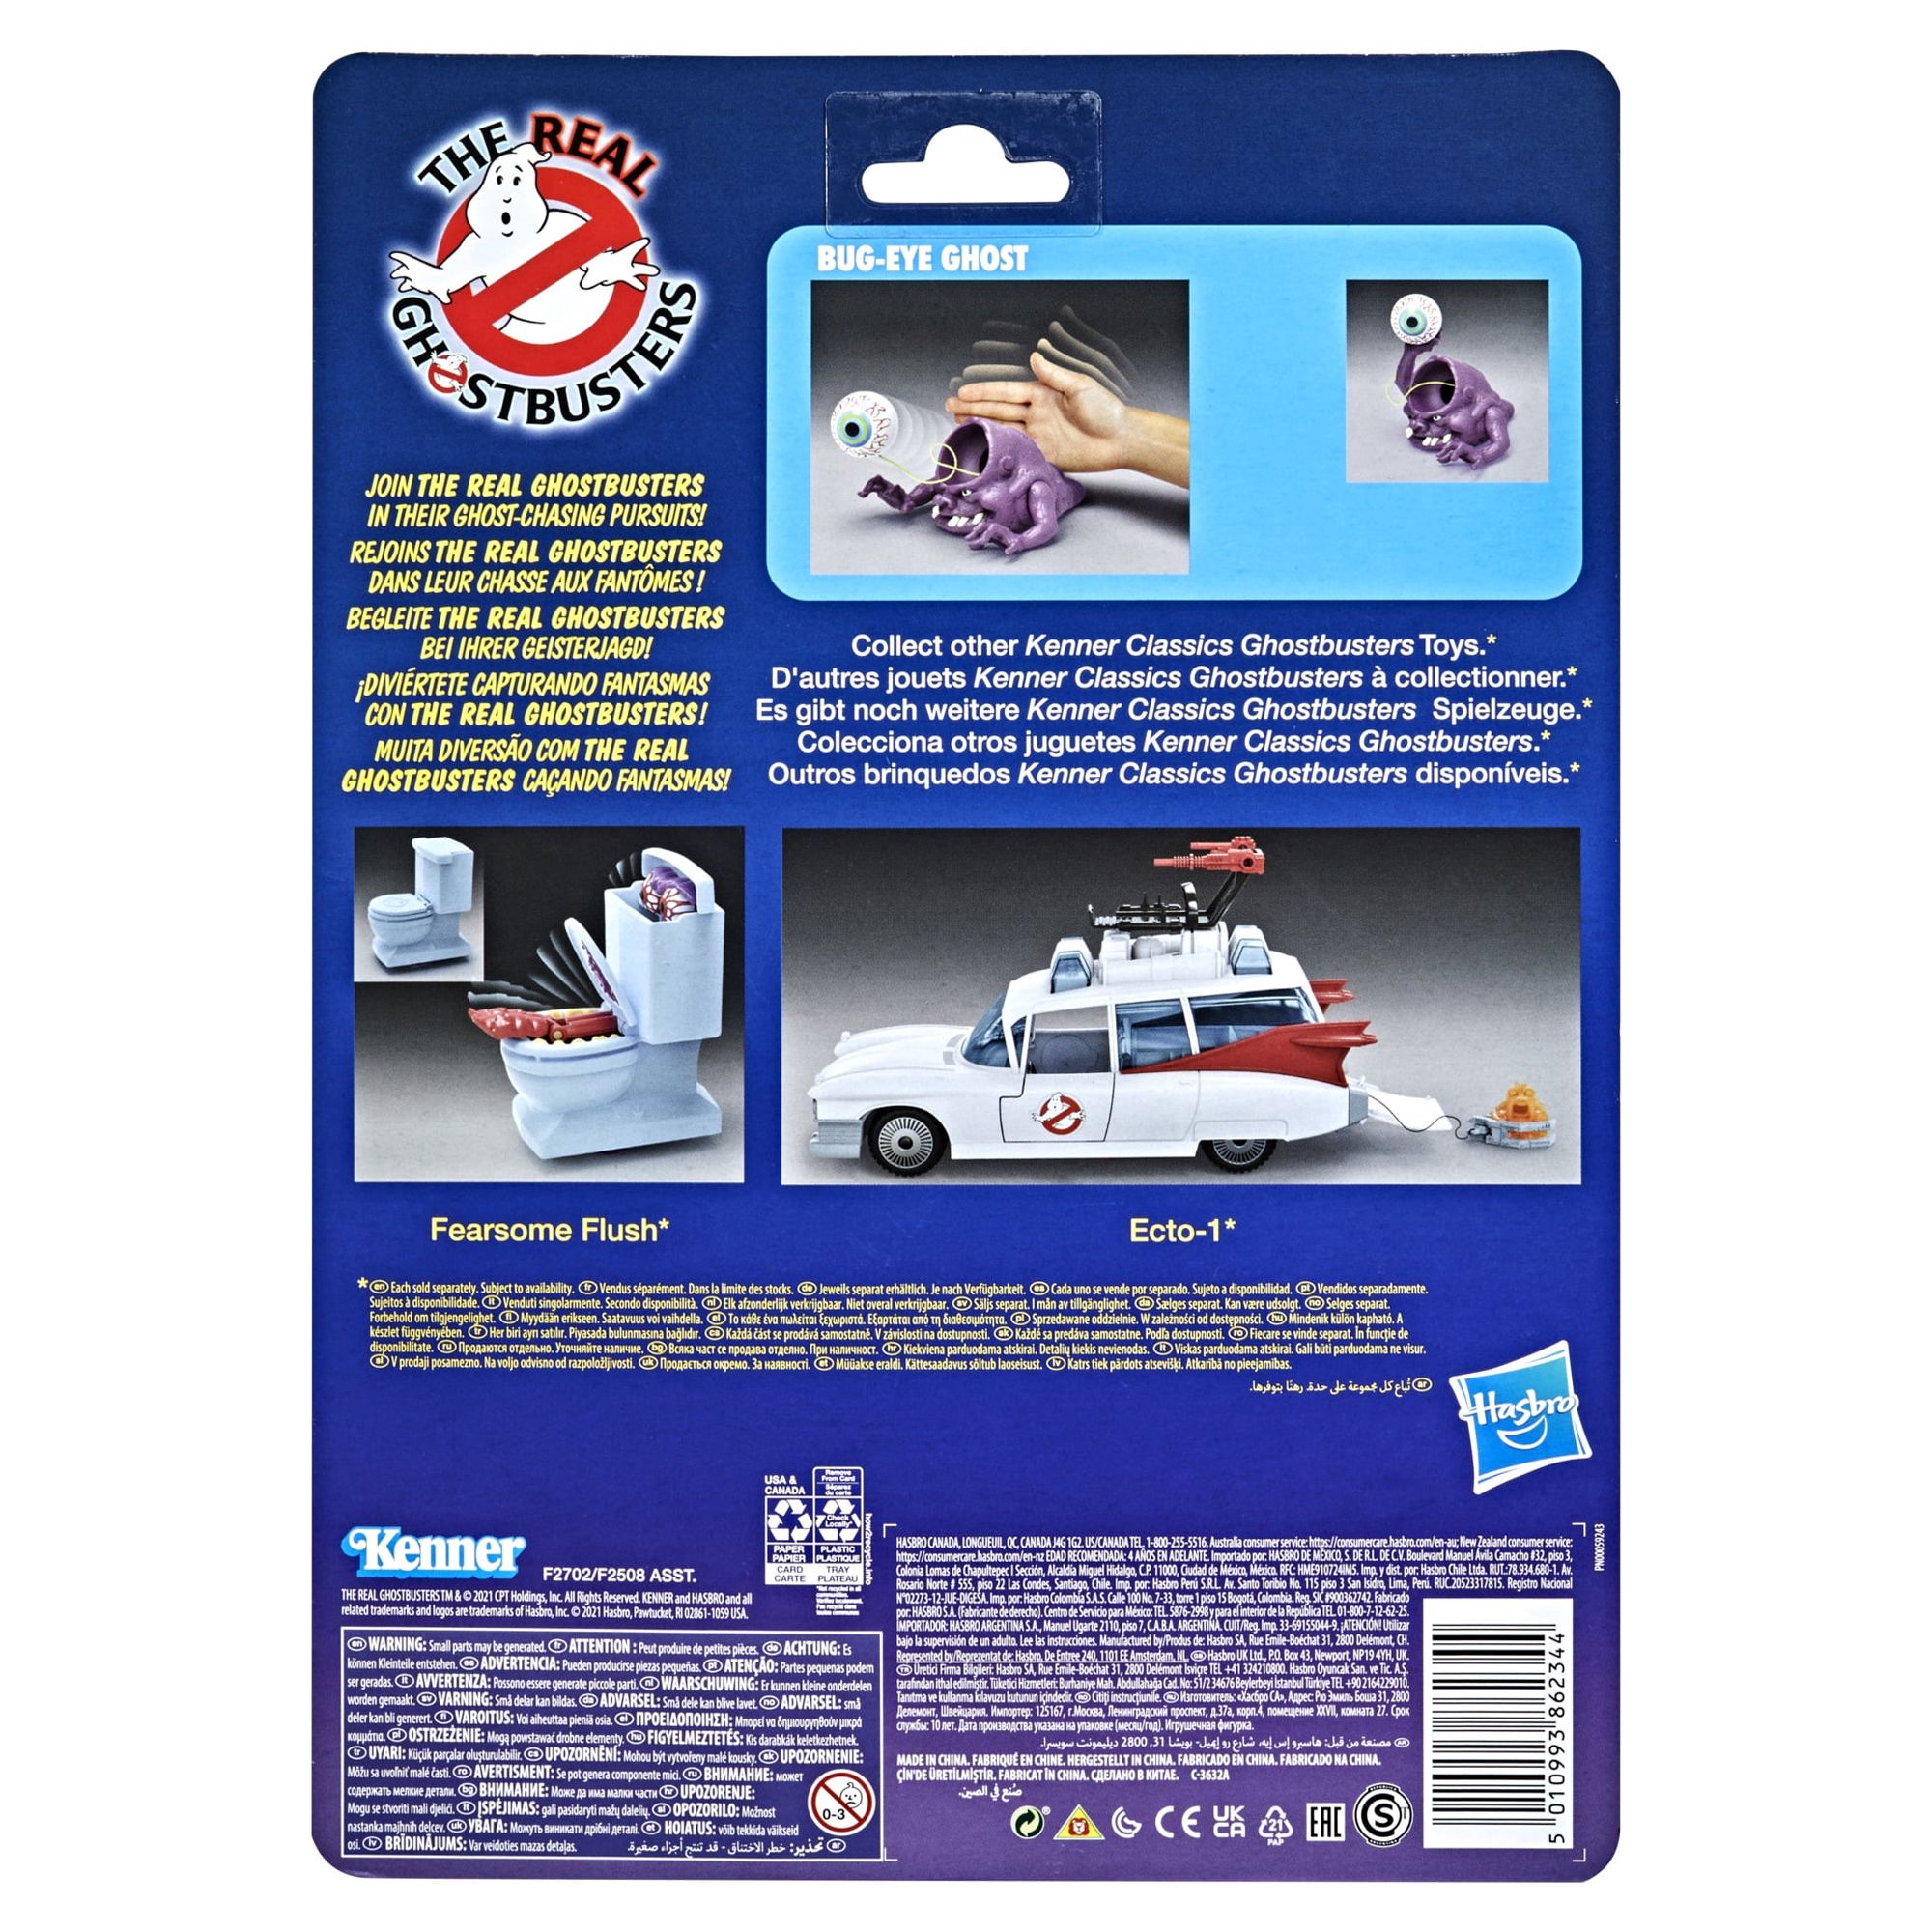 Ghostbusters Kenner Classics The Real Ghostbusters Bug-Eye Ghost Retro Kids Toy Action Figure for Boys and Girls Ages 4 5 6 7 8 and Up - image 5 of 6